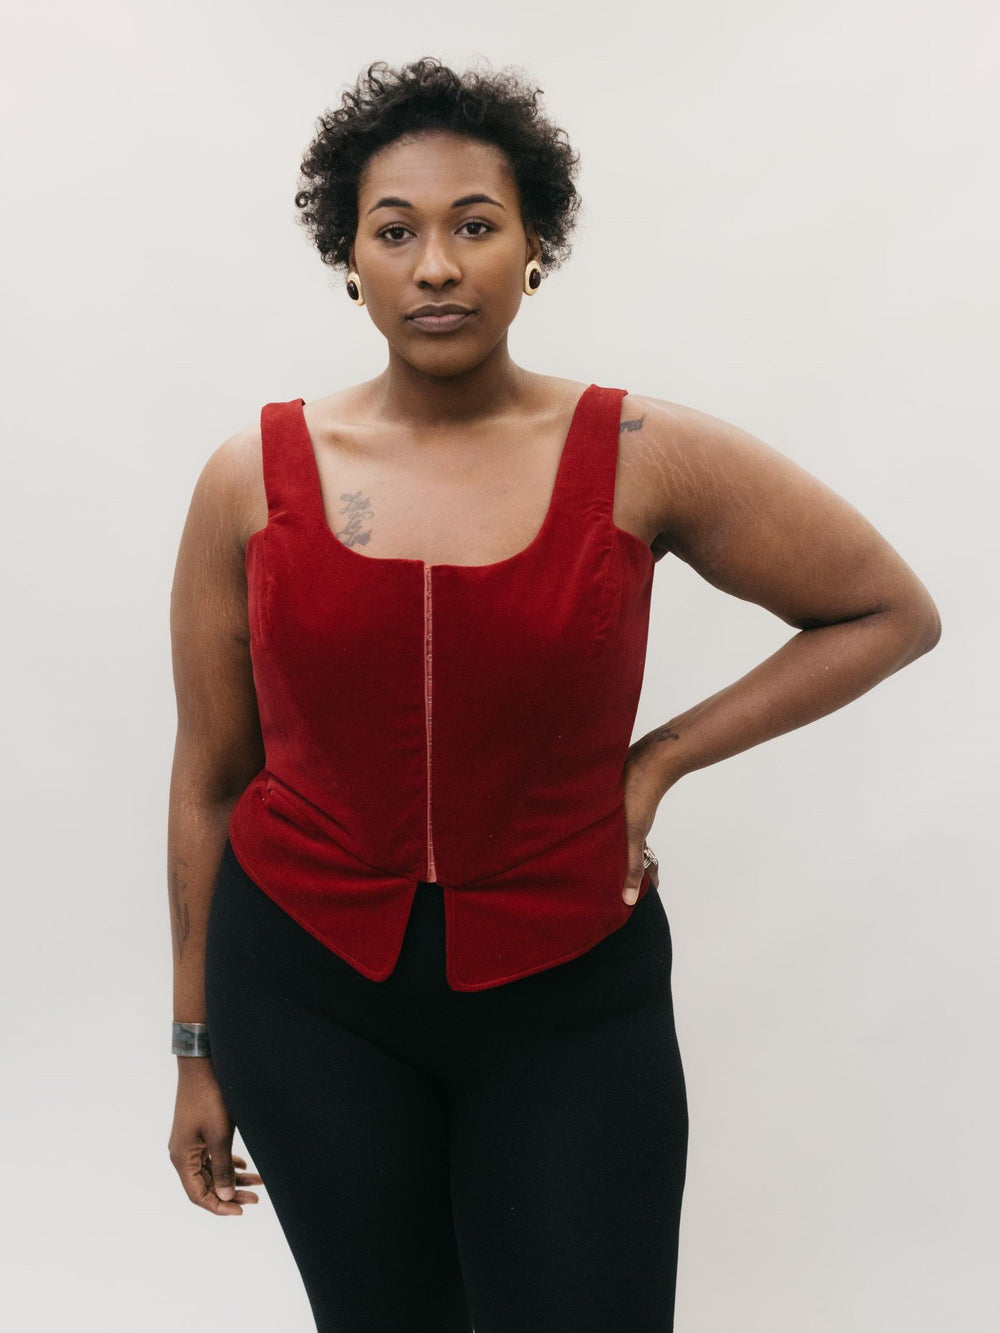 Woman wearing the 267 M'Lady's Corset sewing pattern from Folkwear on The Fold Line. A corset pattern made in silk satin, brocade, damask, shantung, dupioni, cotton damask, brocade, linens and blends fabrics, featuring a square-neck, sleeveless, laced bac